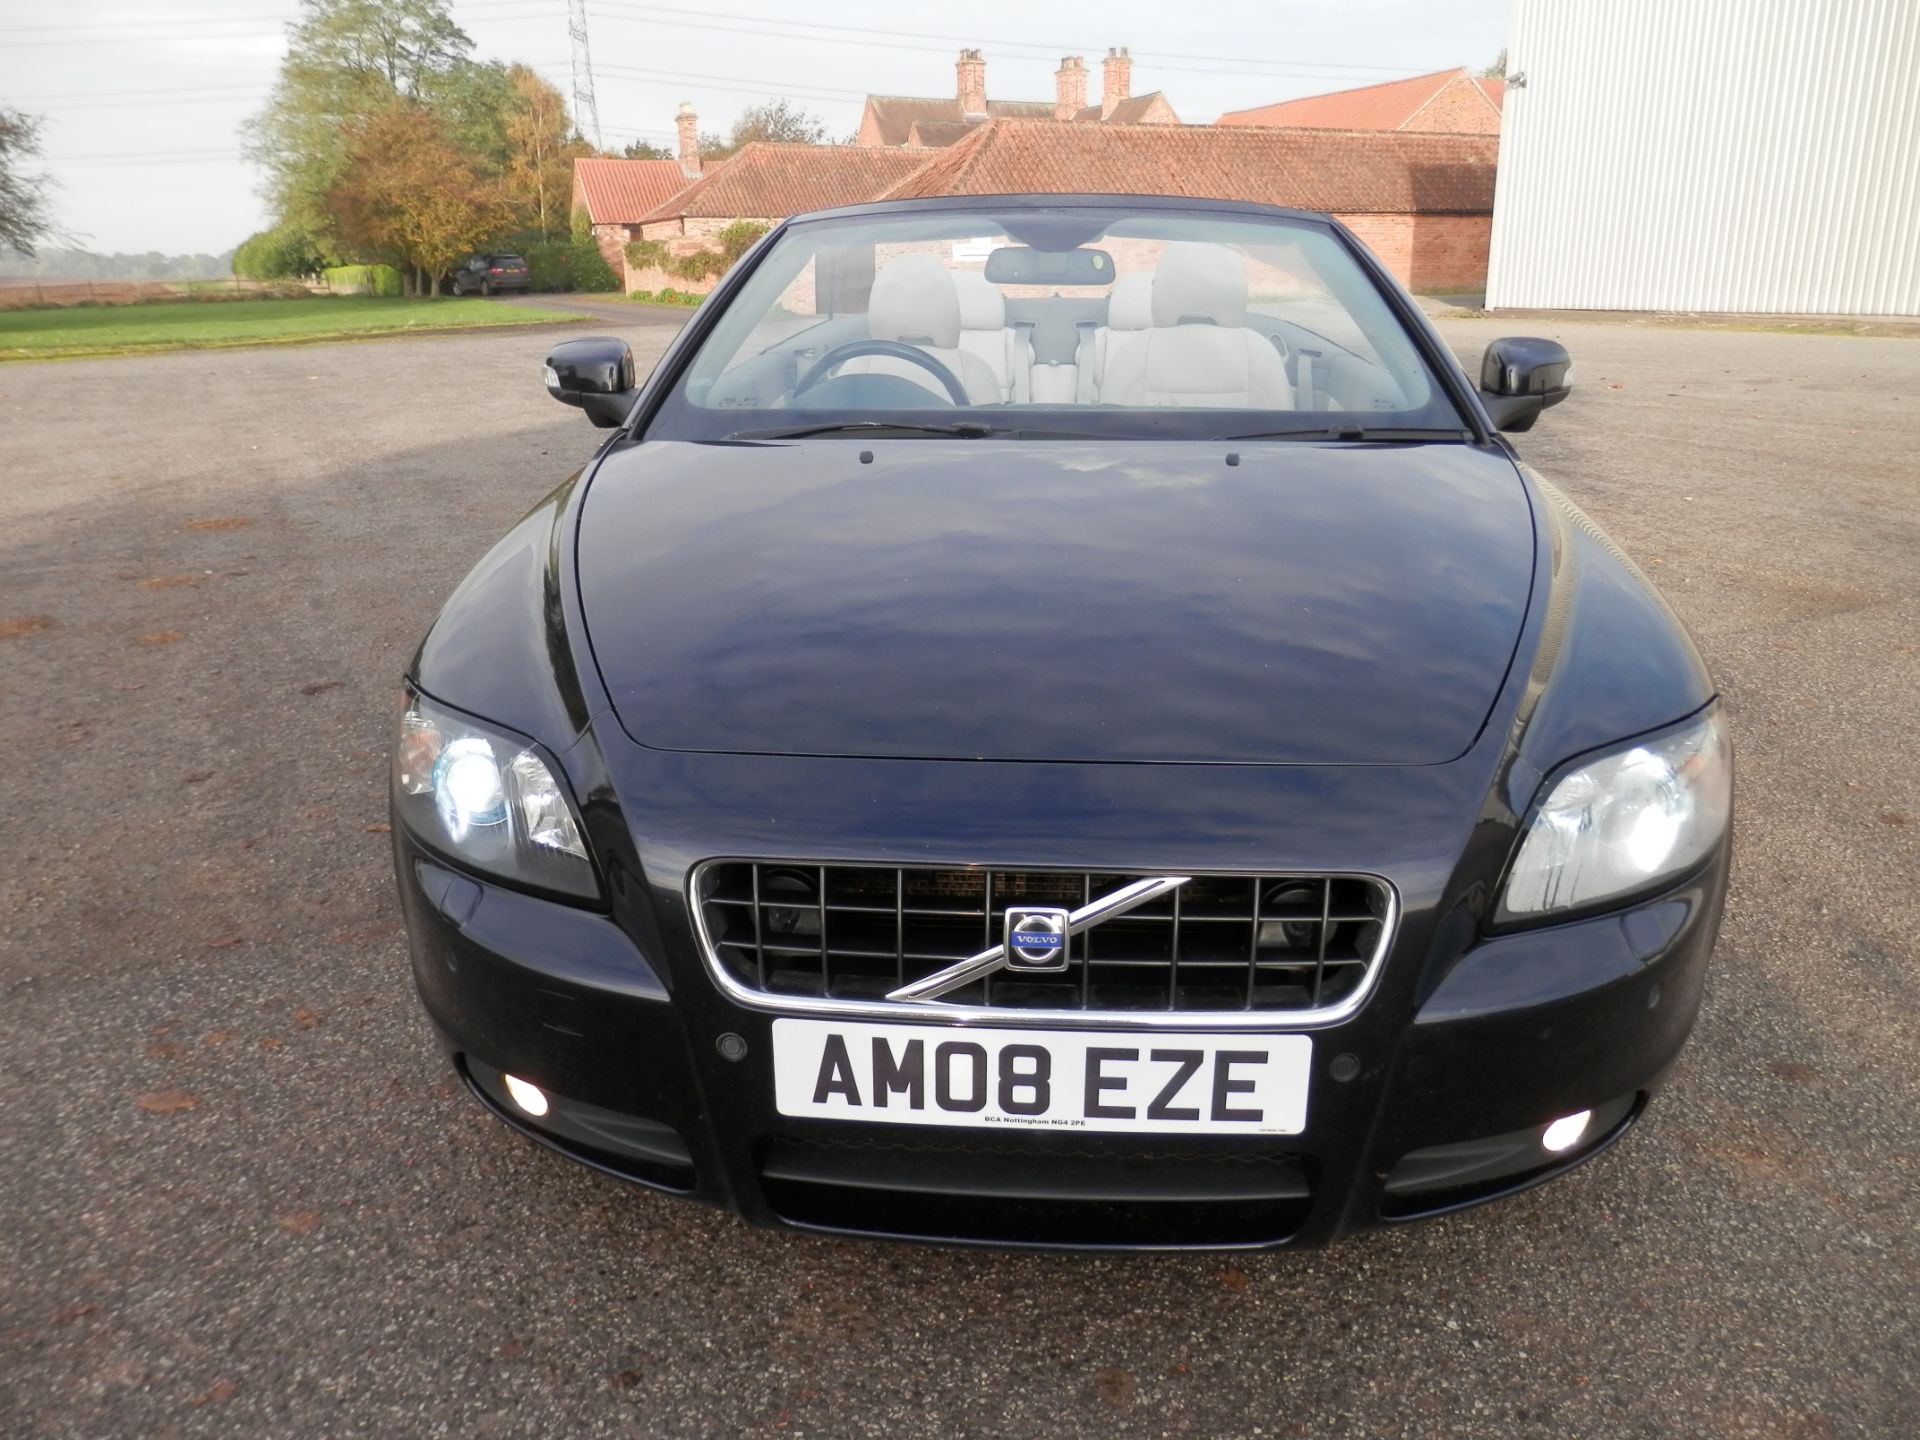 2008/08 VOLVO C70 SE LUX D5, DIESEL AUTO,CONVERTIBLE, MOT MAY 2017, ONLY 102K MILES, 180 BHP. - Image 2 of 57